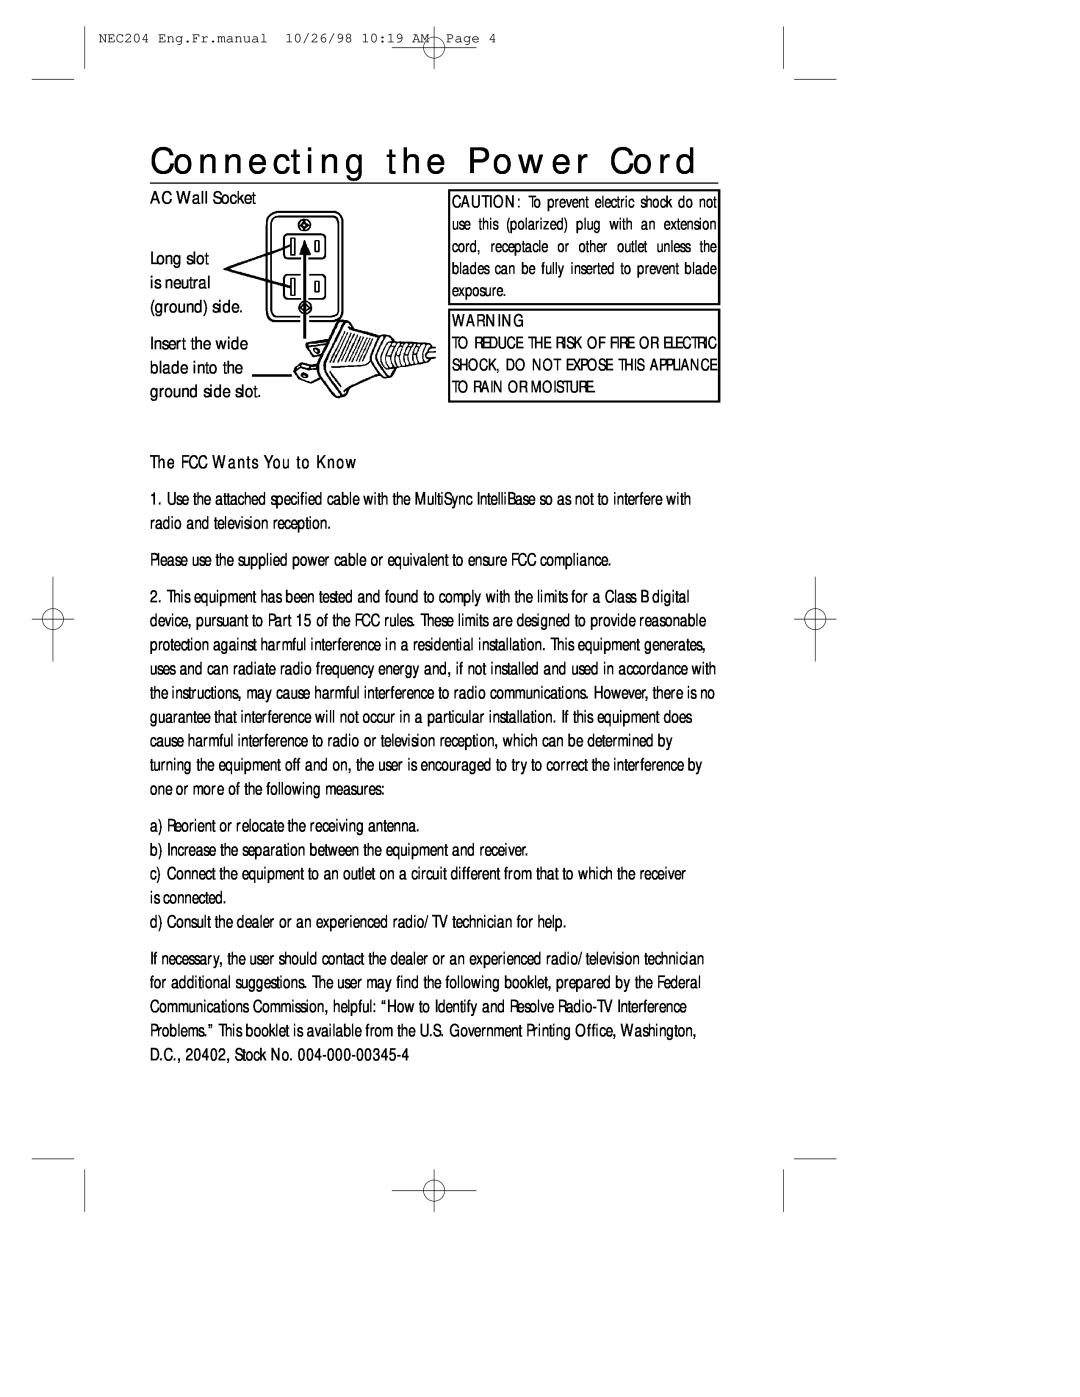 NEC IB-USB, A3844 user manual Connecting the Power Cord, The FCC Wants You to Know 